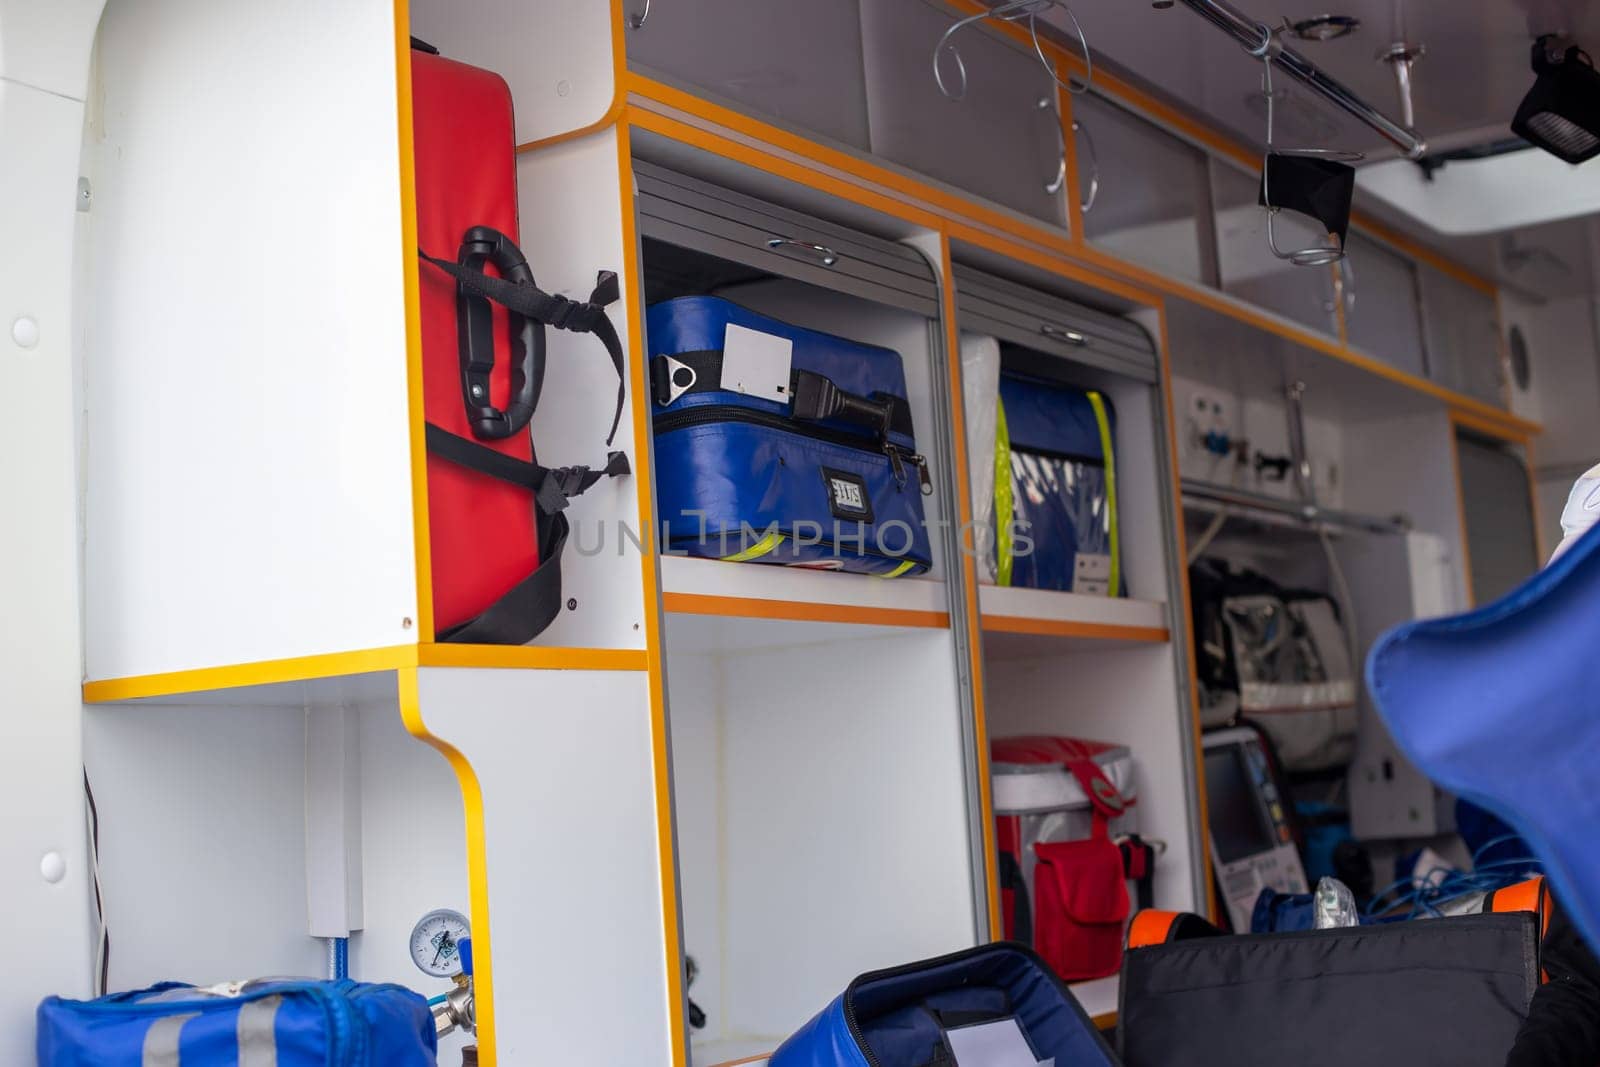 Inside of an ambulance showing medical supplies and storage compartments.